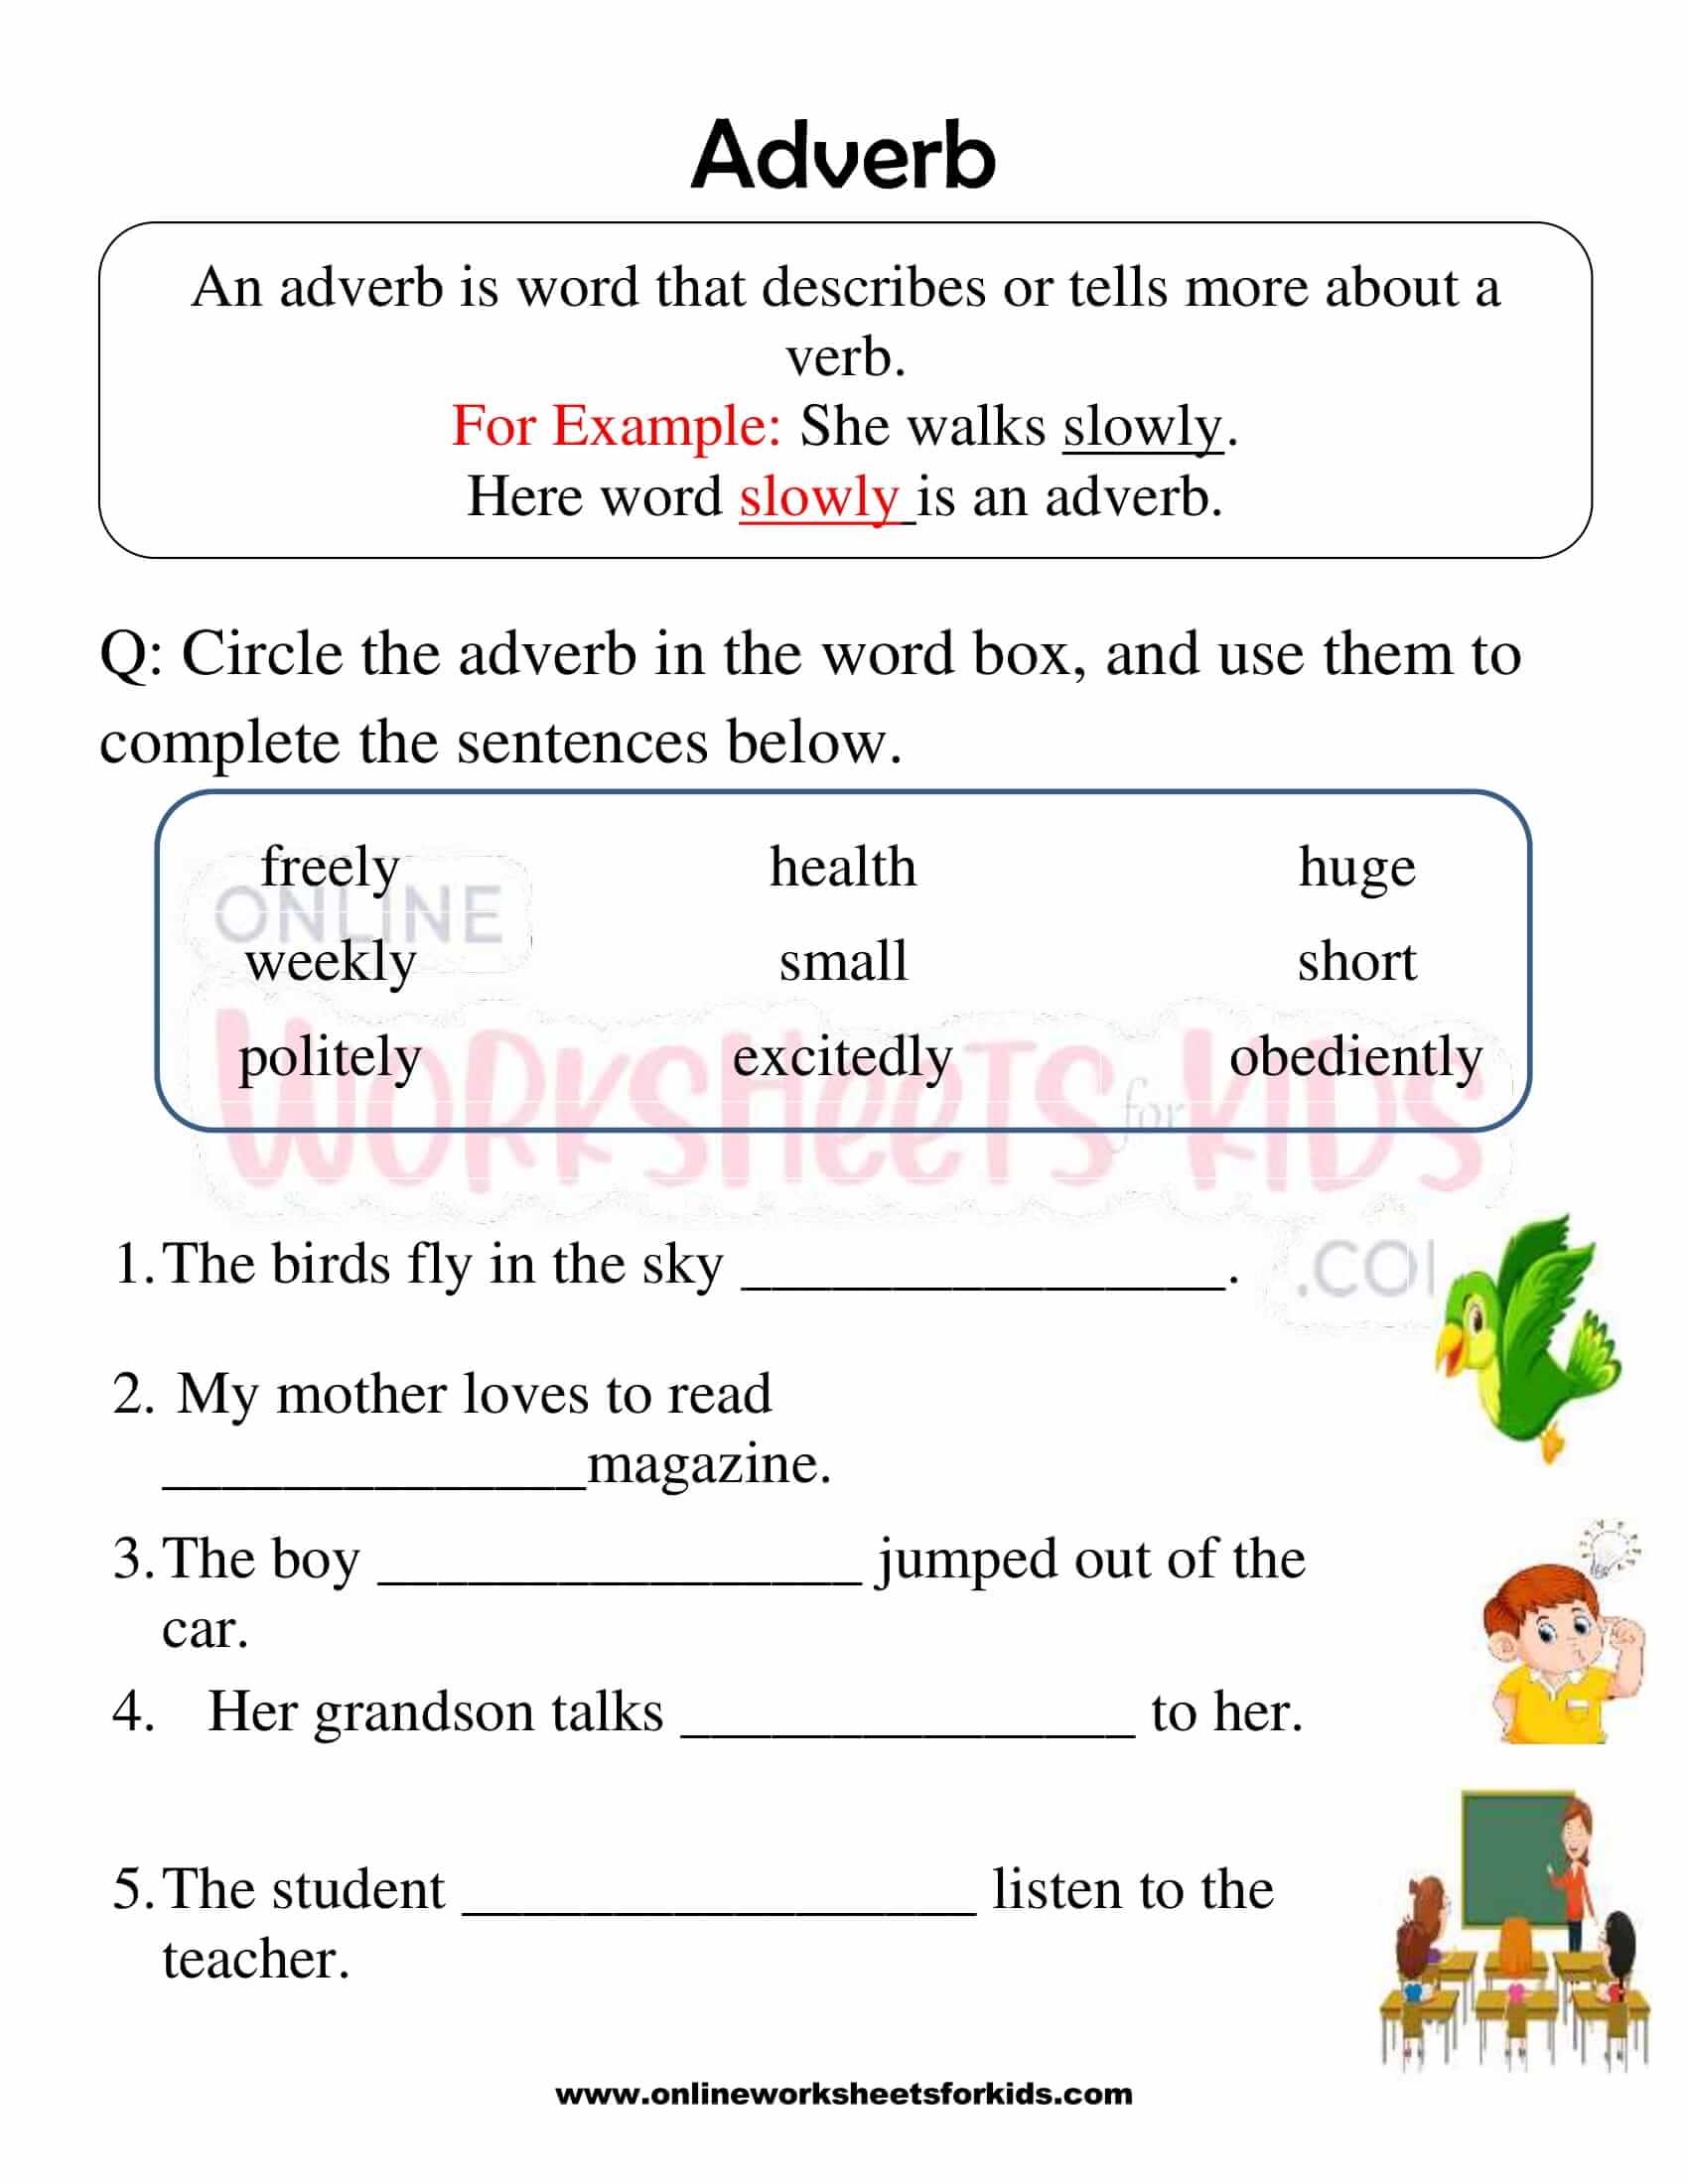 using-adverbs-worksheets-k5-learning-printable-adverb-worksheets-for